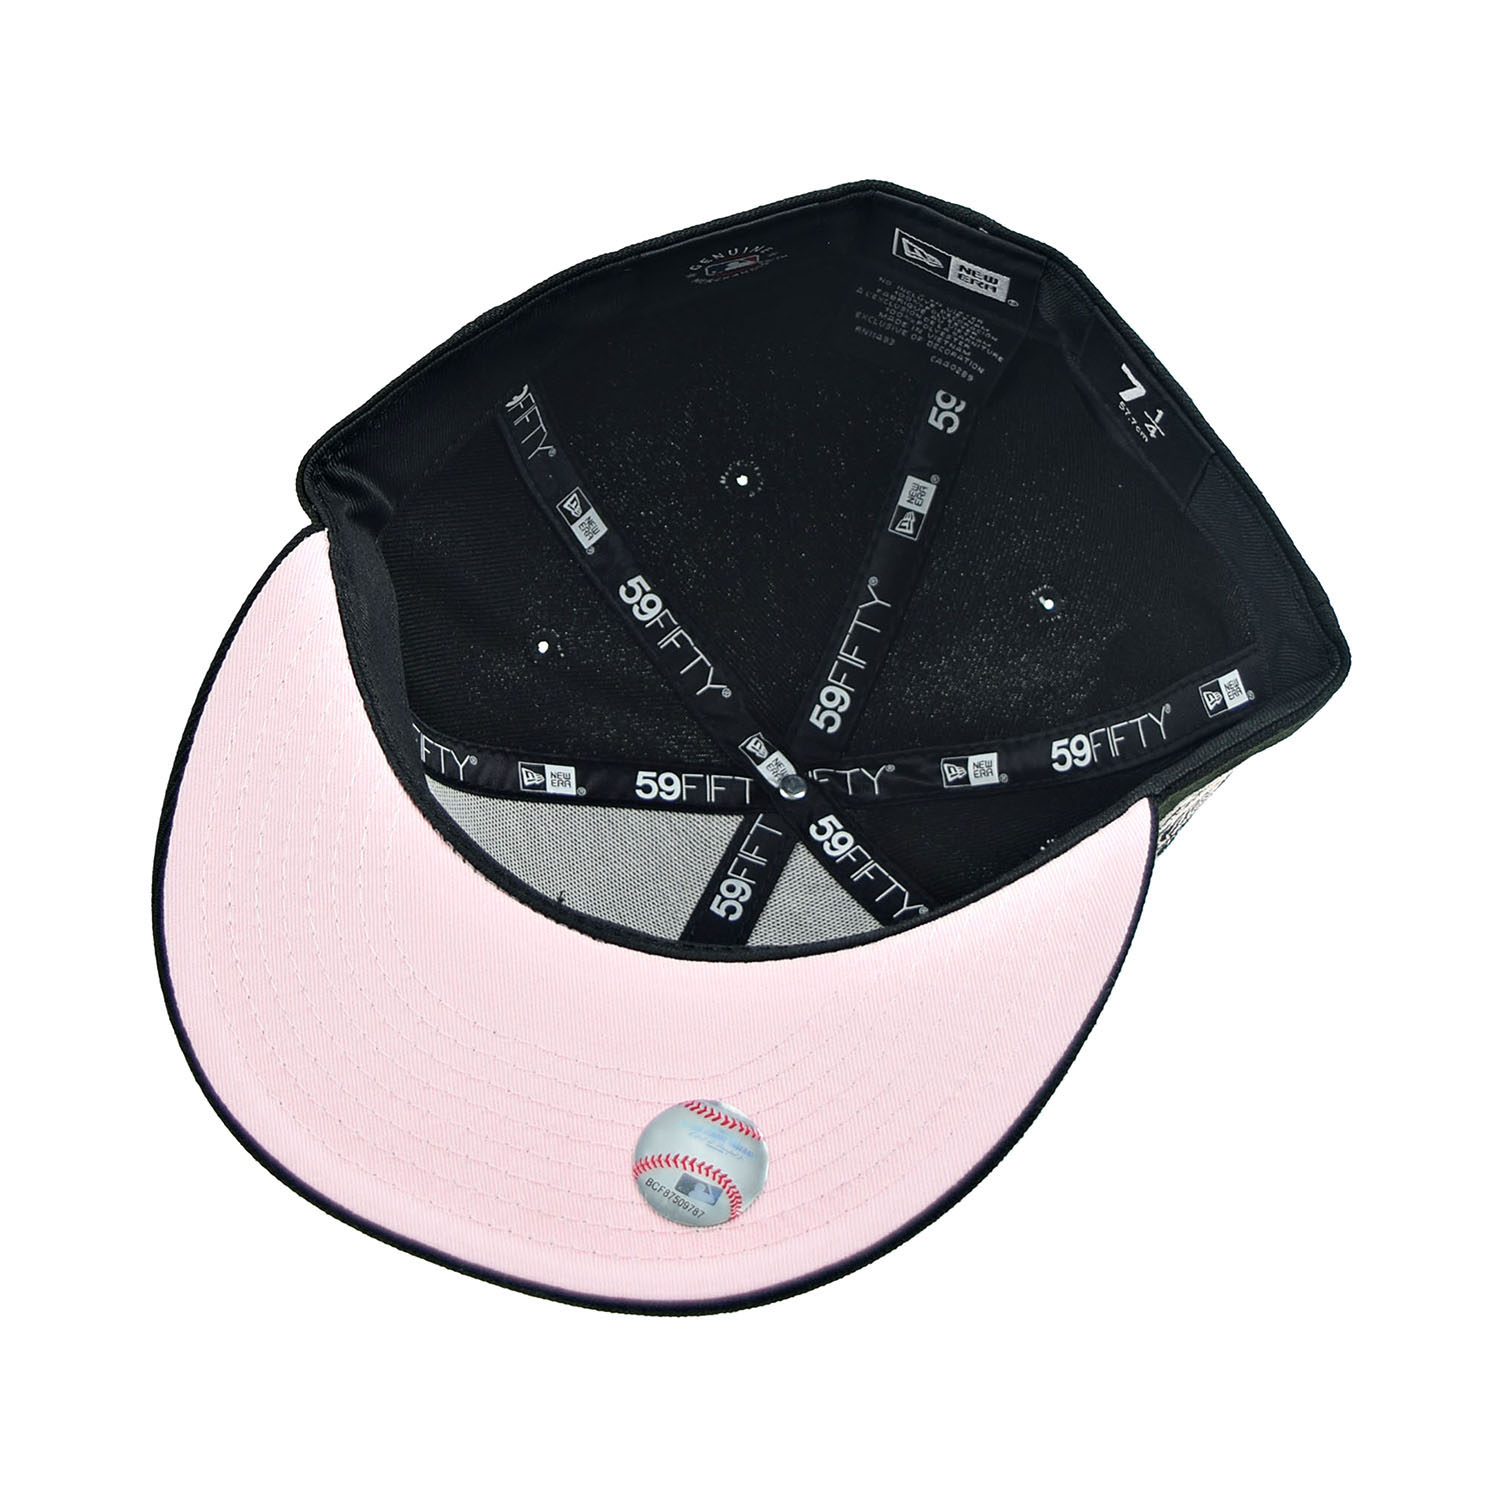 New Era Atlanta Braves "World Series Drip" 59Fifty Fitted Hat Black-Pink Bottom 60185462 (Size 7 3/4)